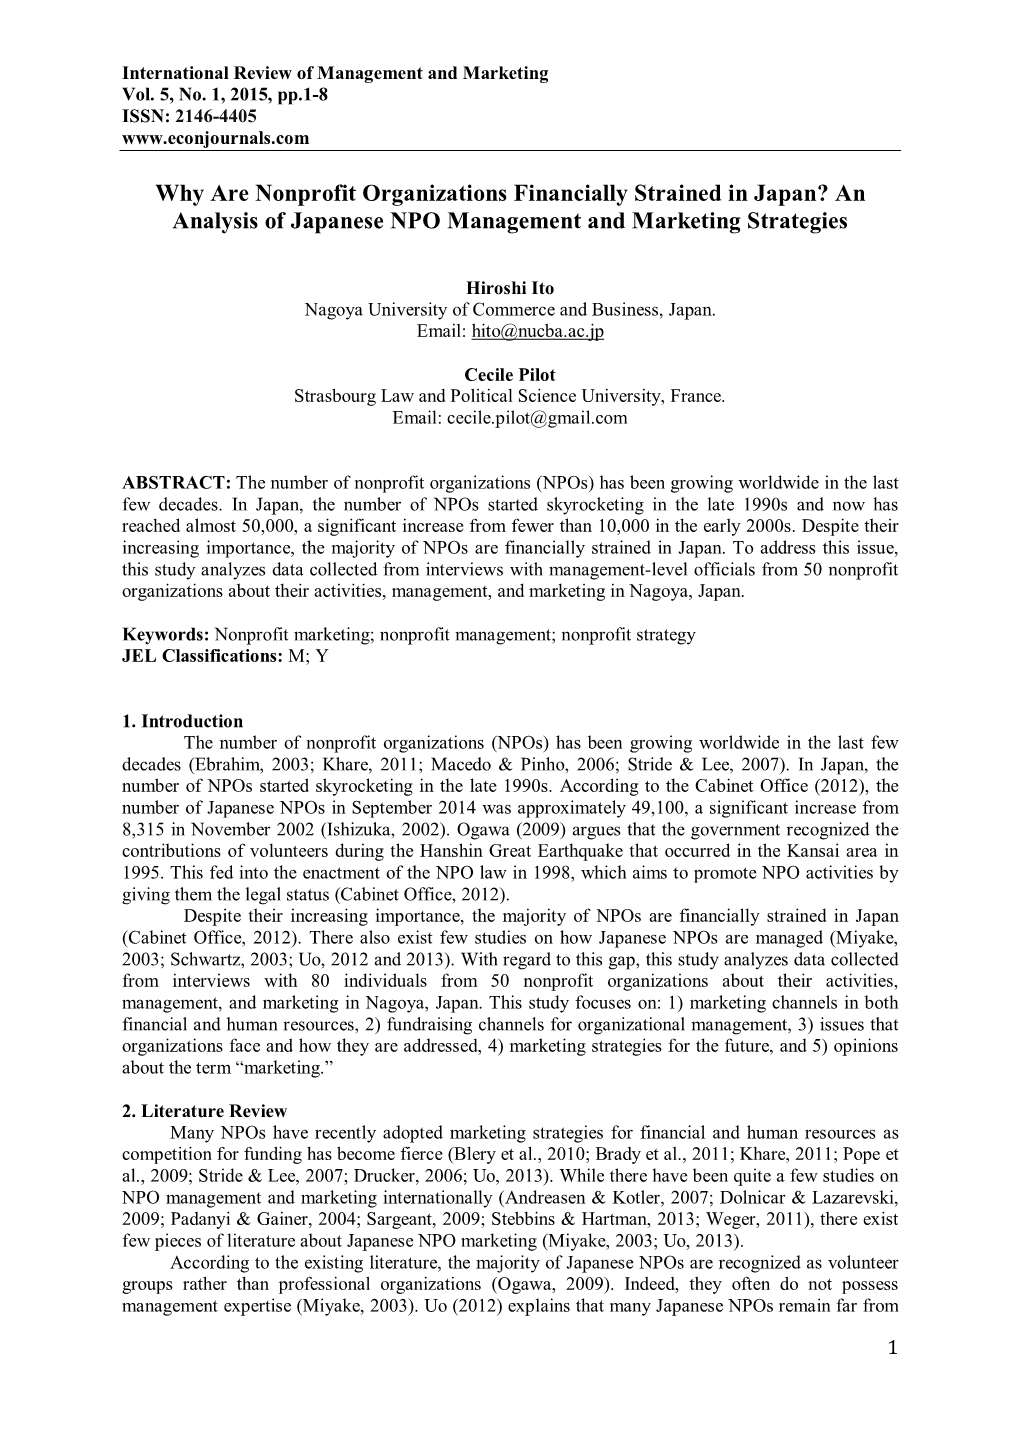 Why Are Nonprofit Organizations Financially Strained in Japan? an Analysis of Japanese NPO Management and Marketing Strategies